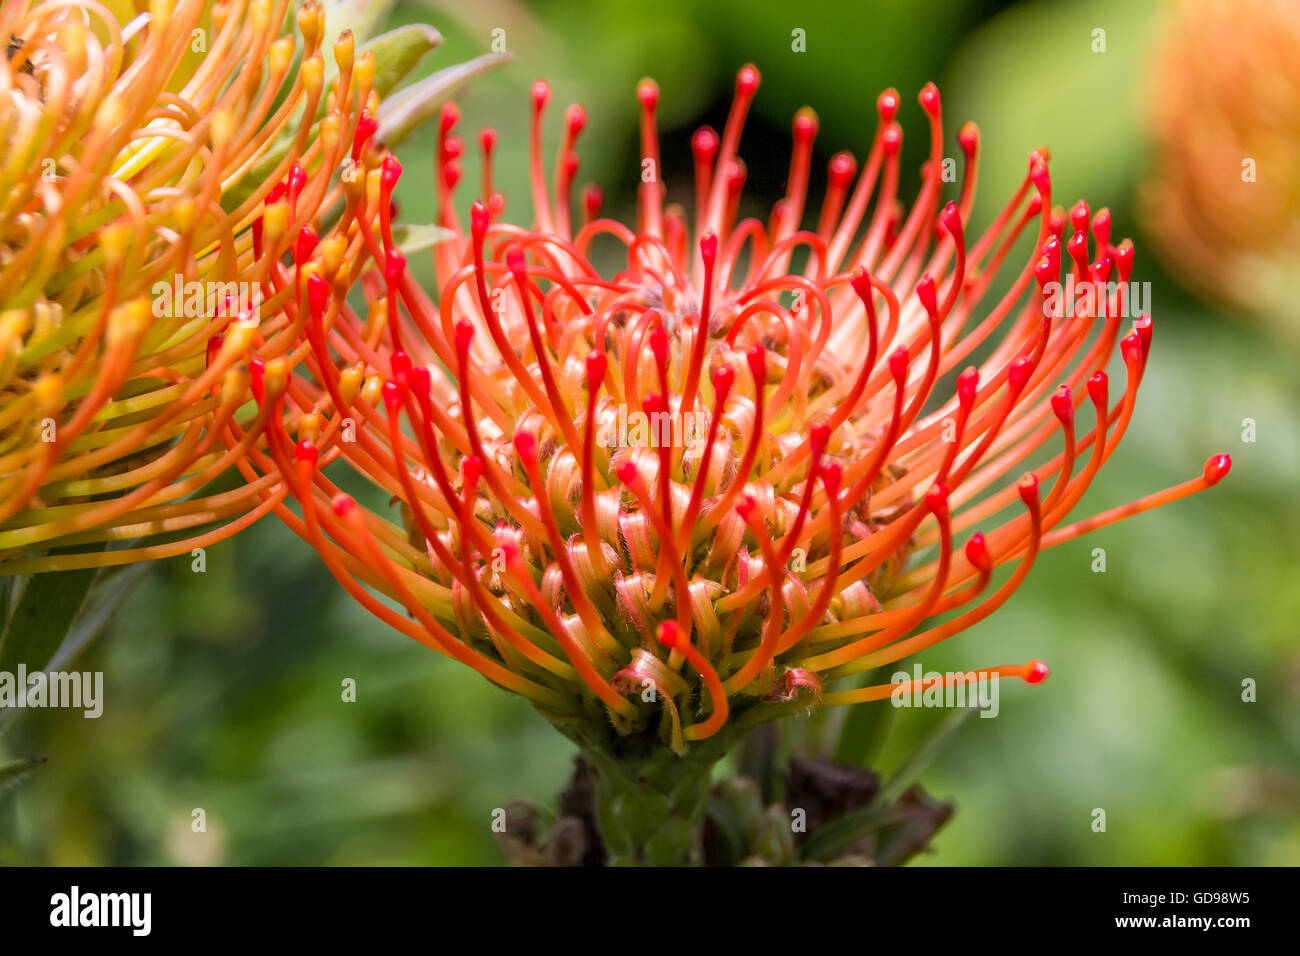 Red protea, the national flower of South Africa Stock Photo